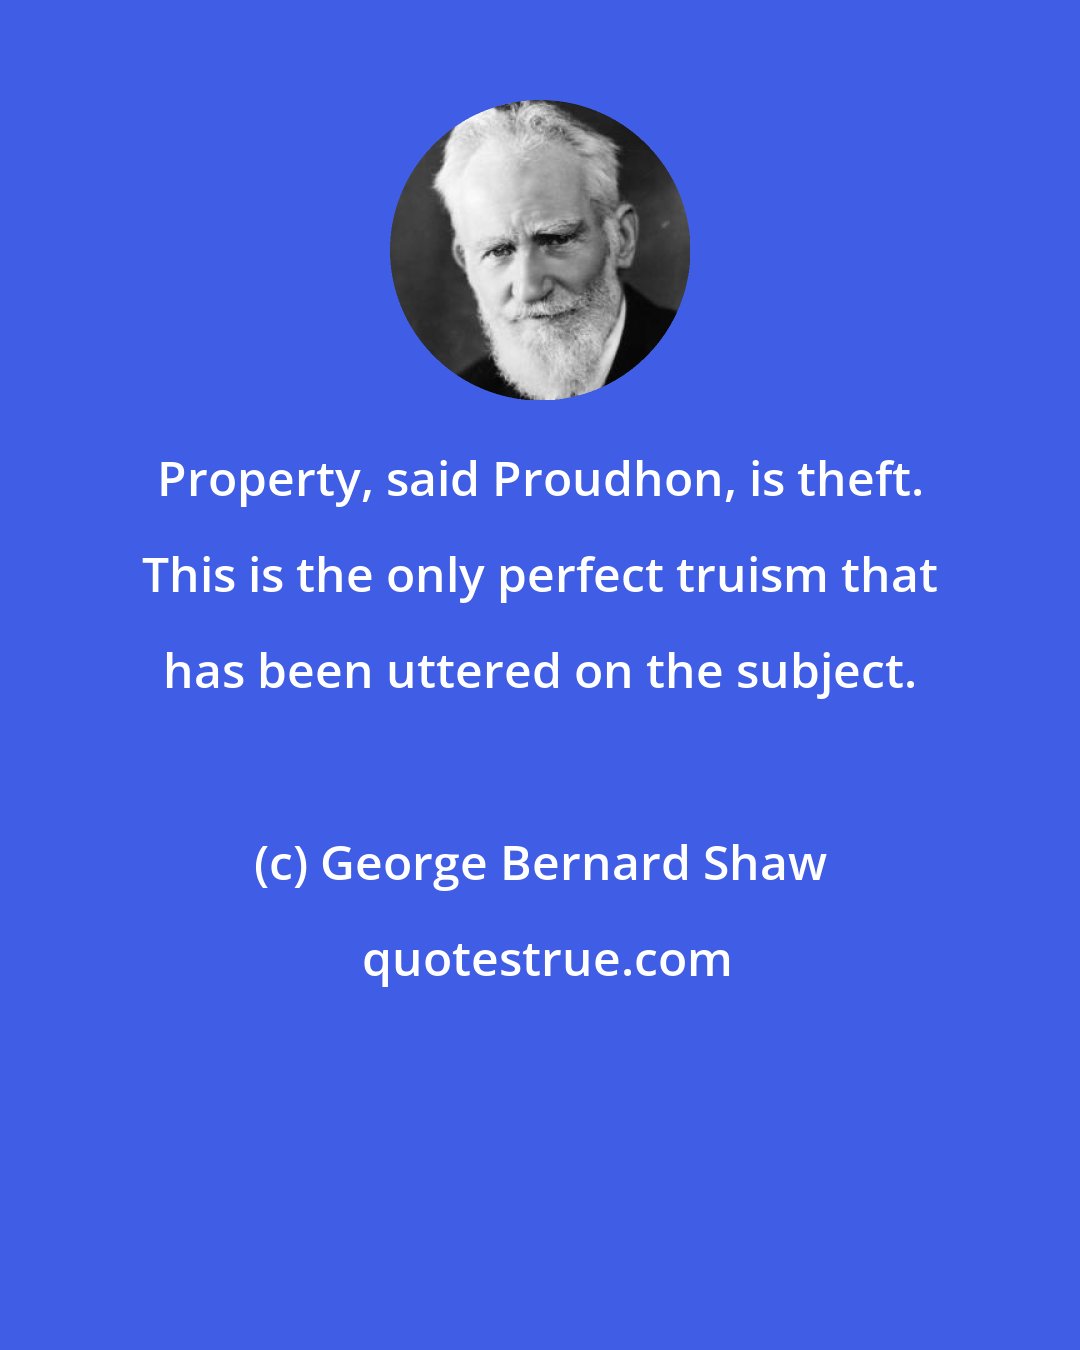 George Bernard Shaw: Property, said Proudhon, is theft. This is the only perfect truism that has been uttered on the subject.